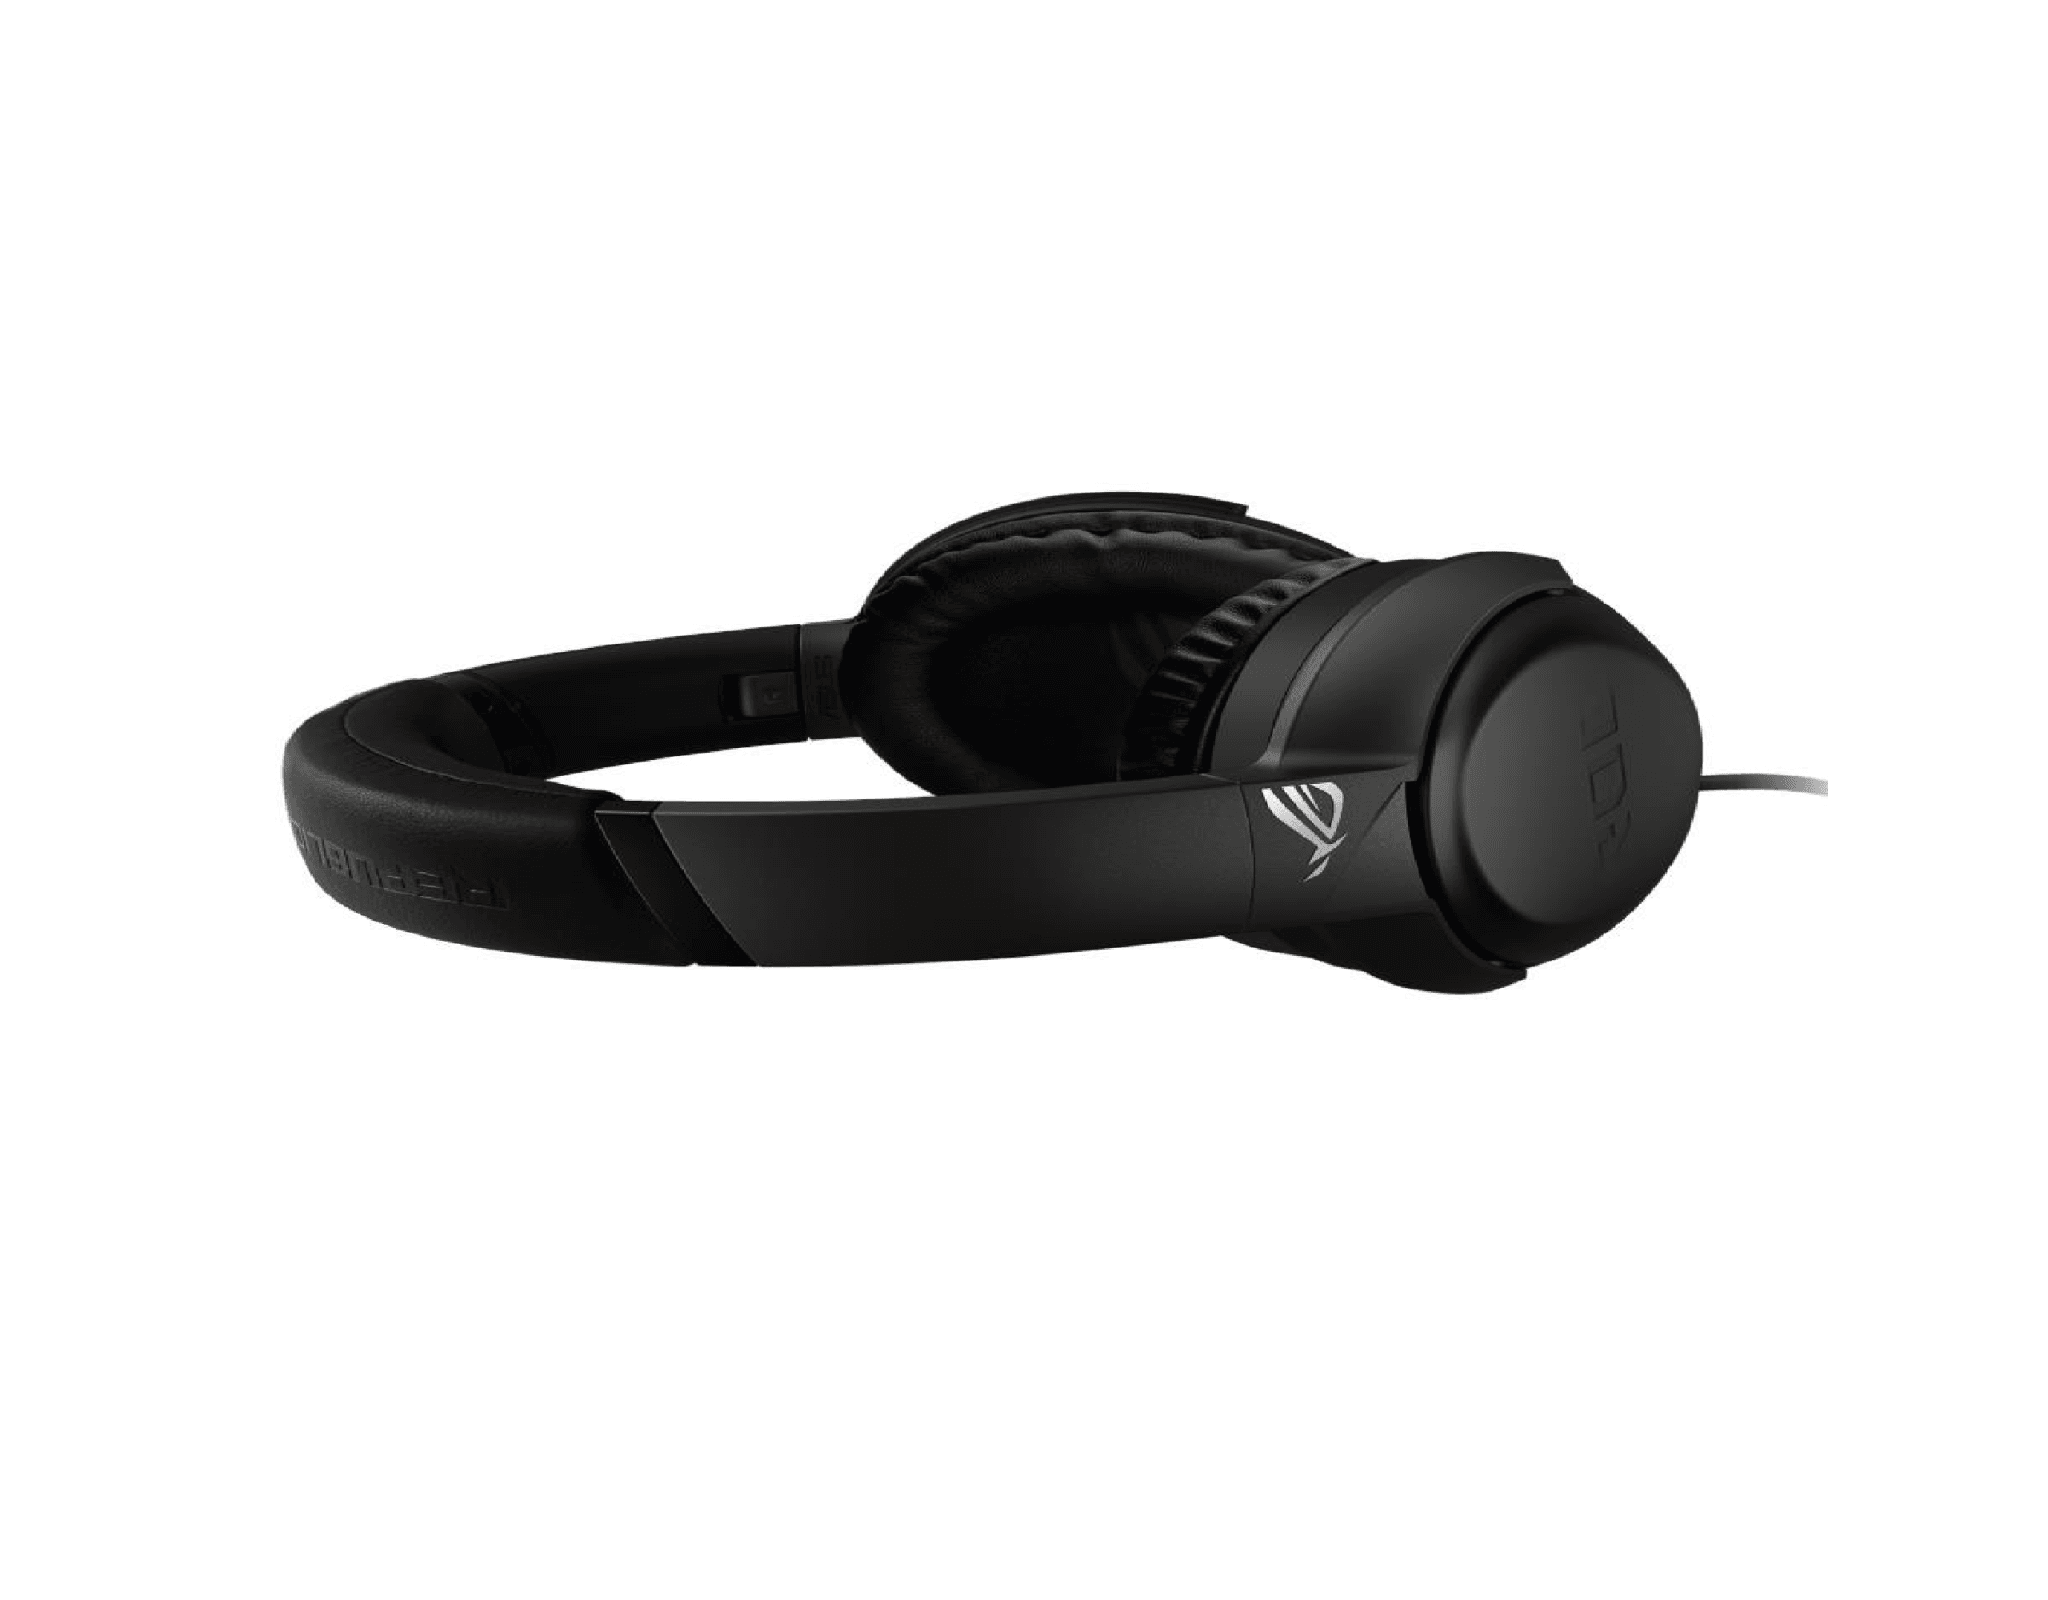 Asus ROG STRIX Go Core Gaming Headset - Store 974 | ستور ٩٧٤